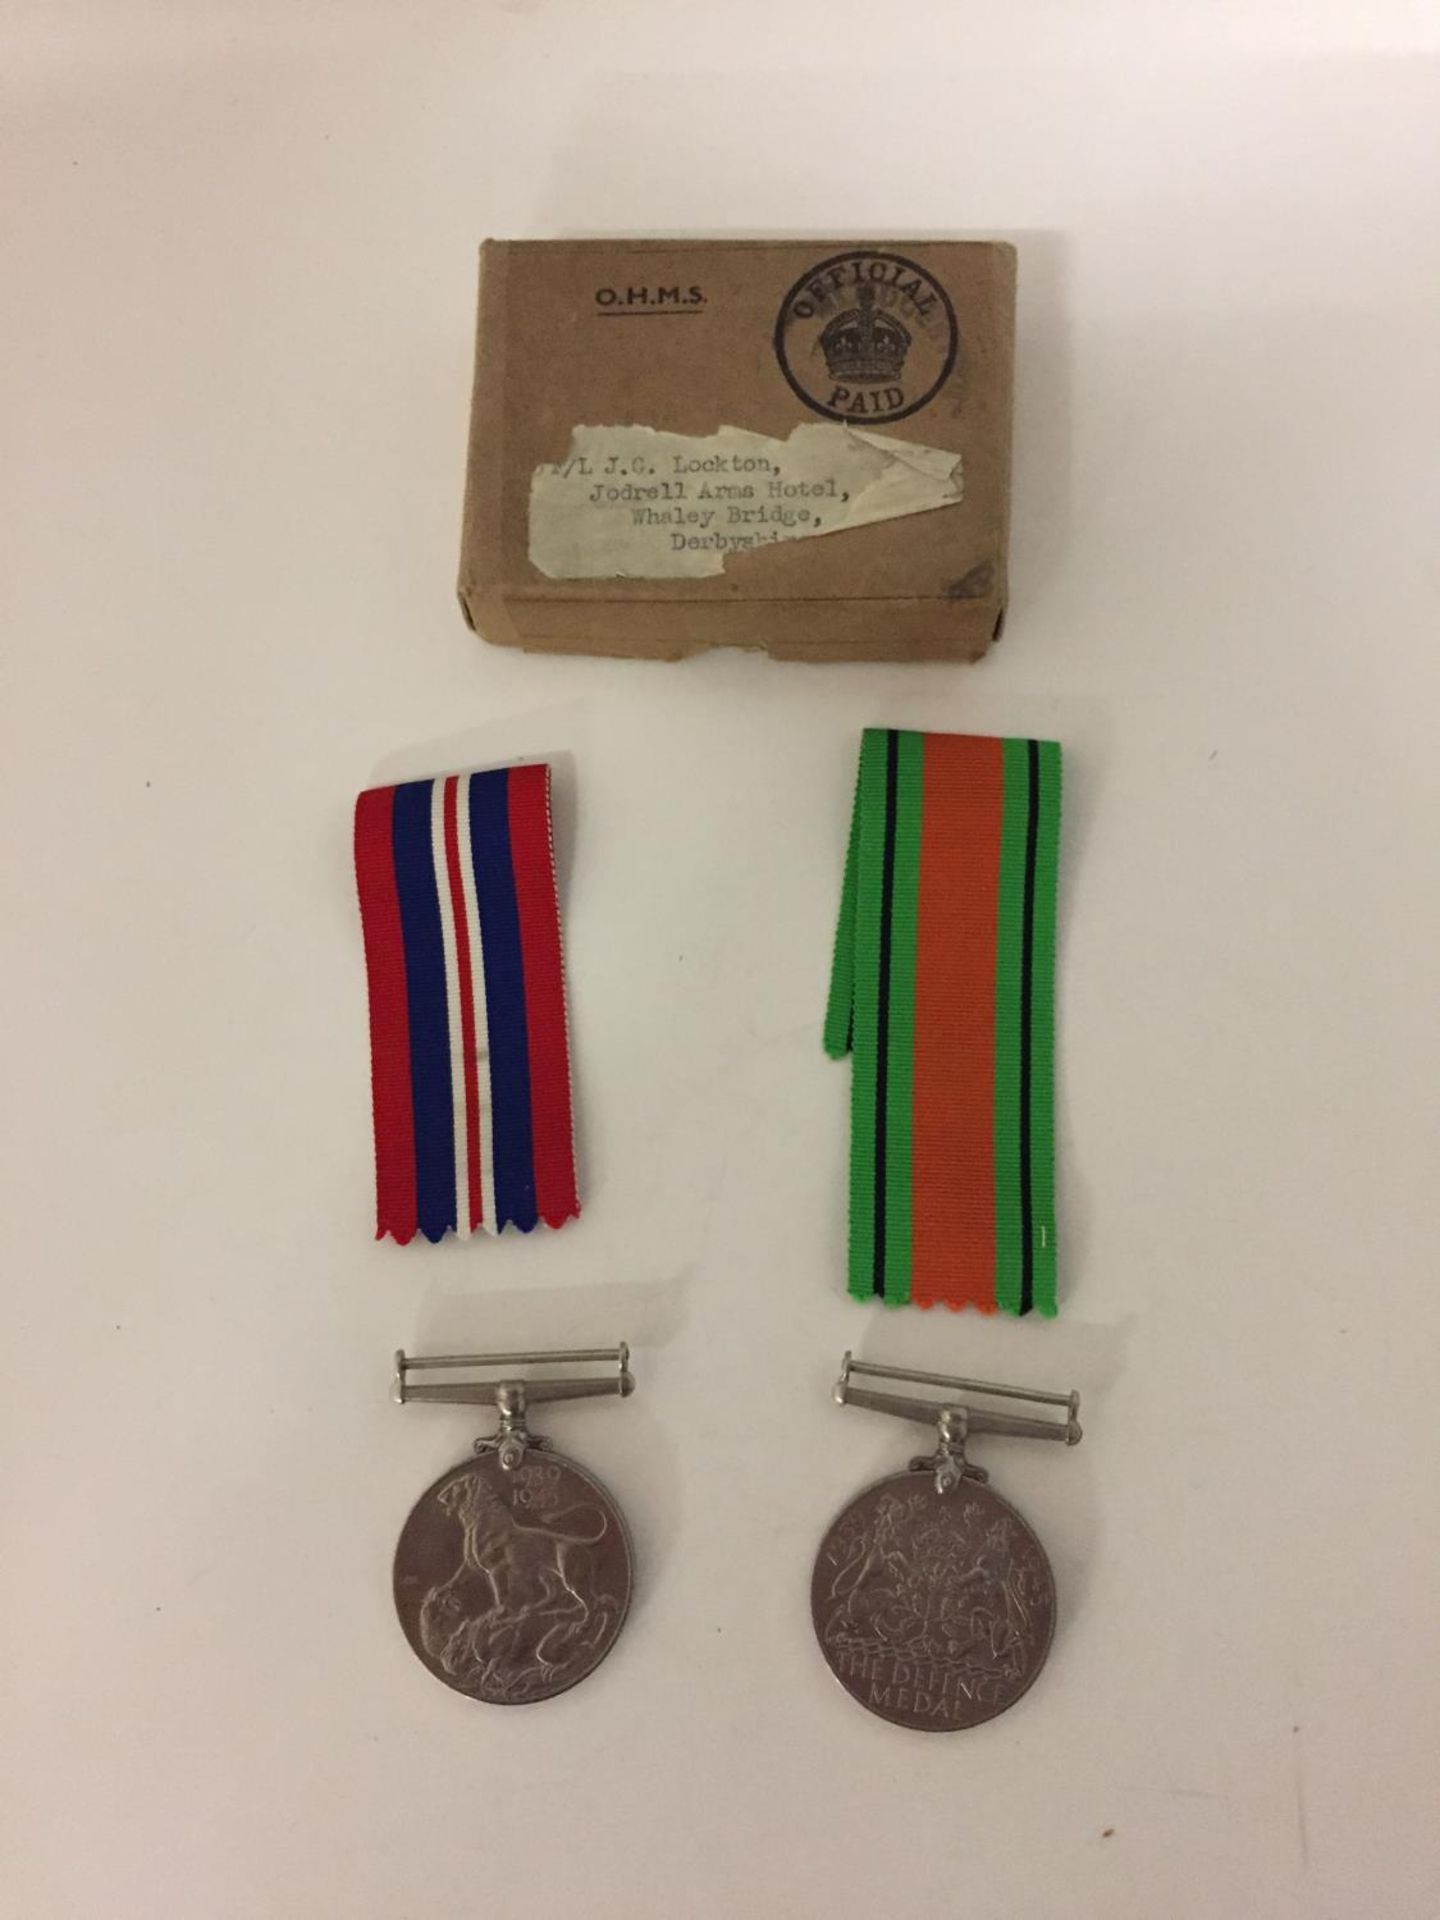 A 1939-1945 MEDAL AND DEFENCE MEDAL